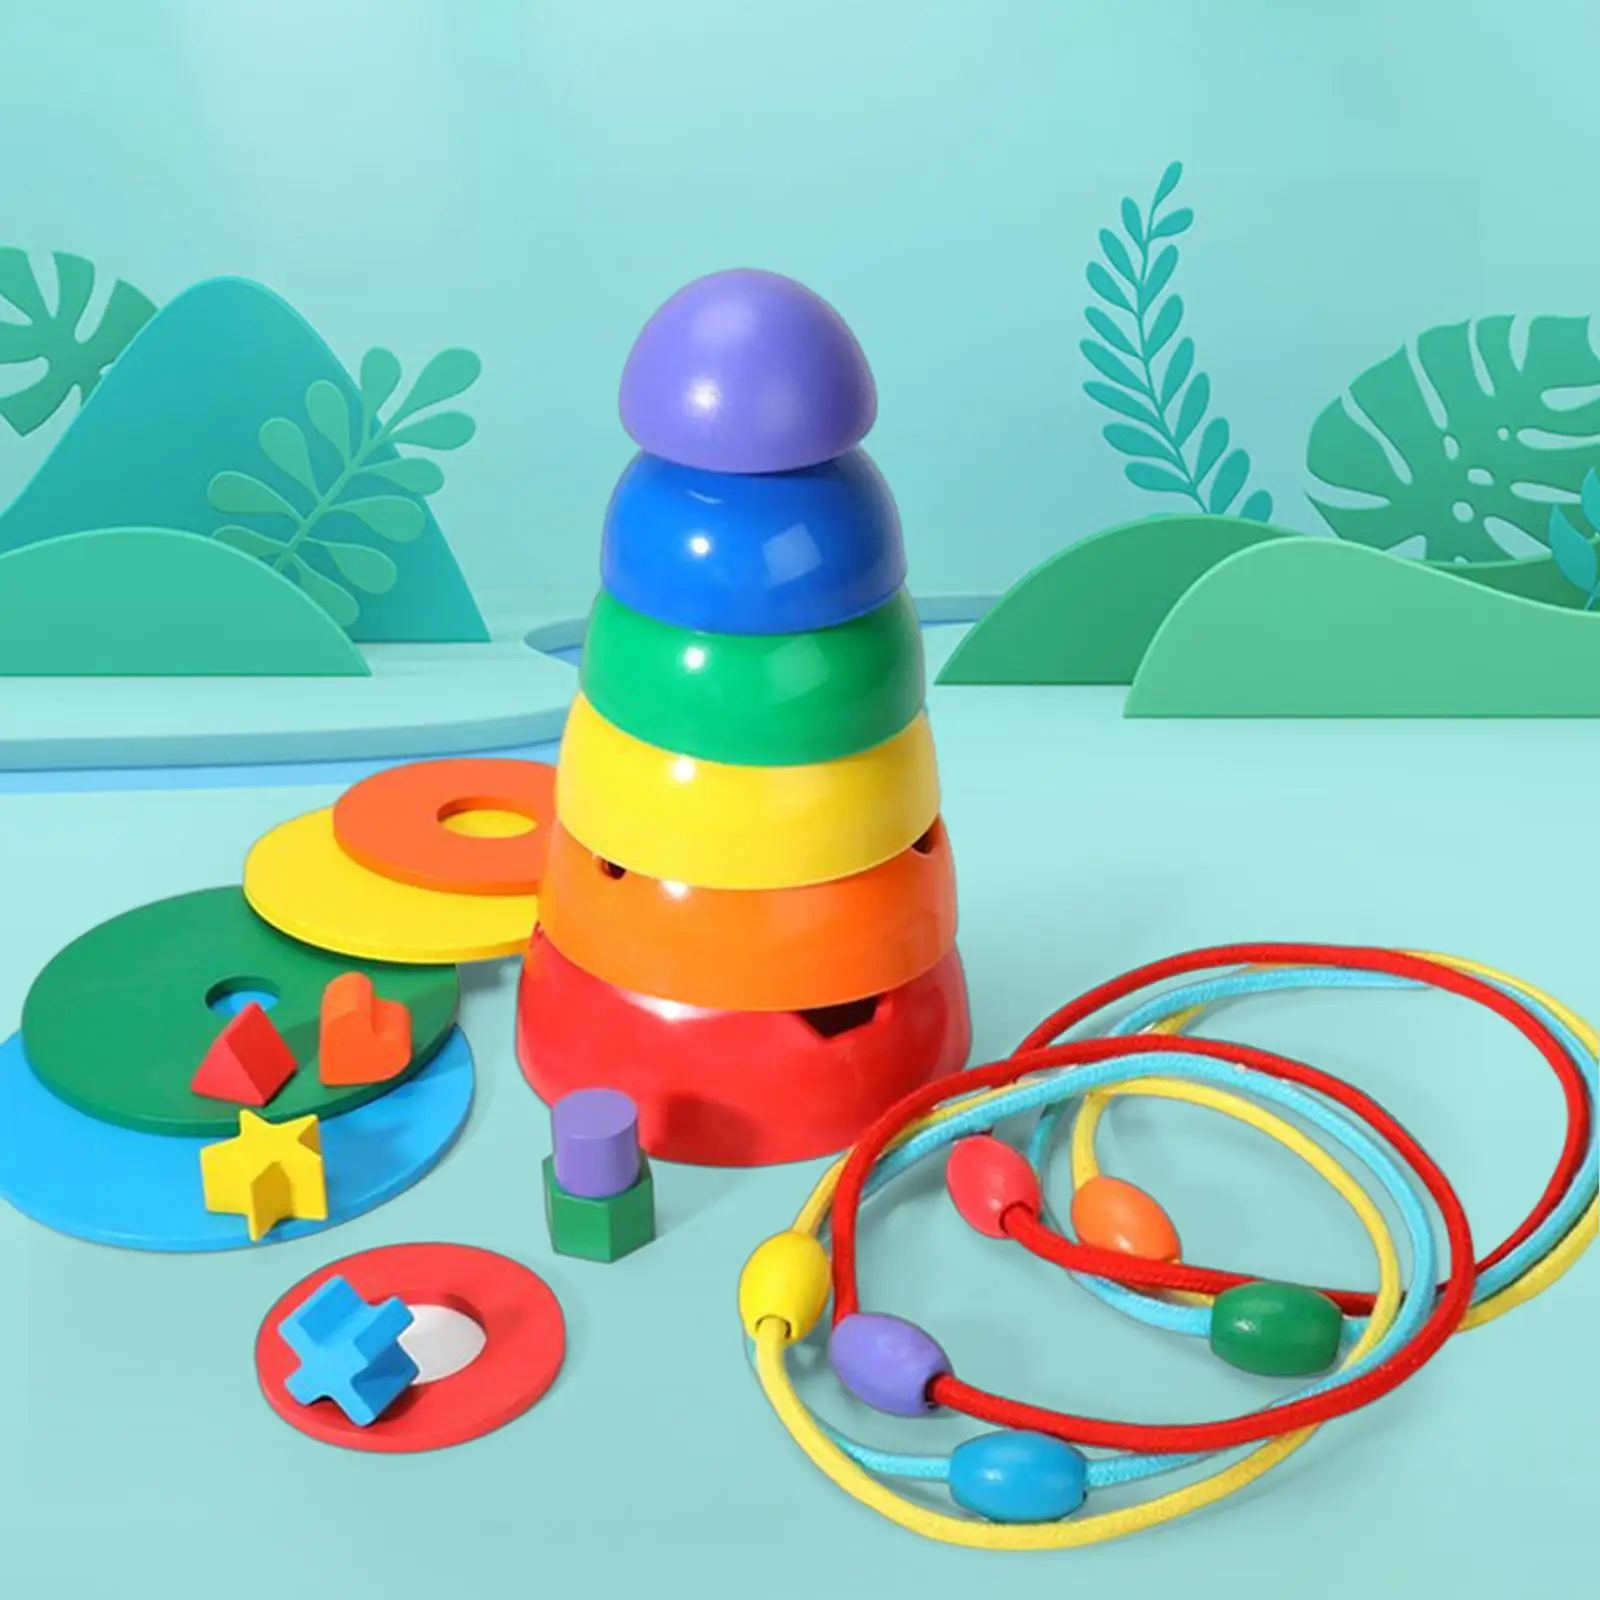 Colorful Nesting Building Stacking Blocks Toy Educational for Babies Gifts